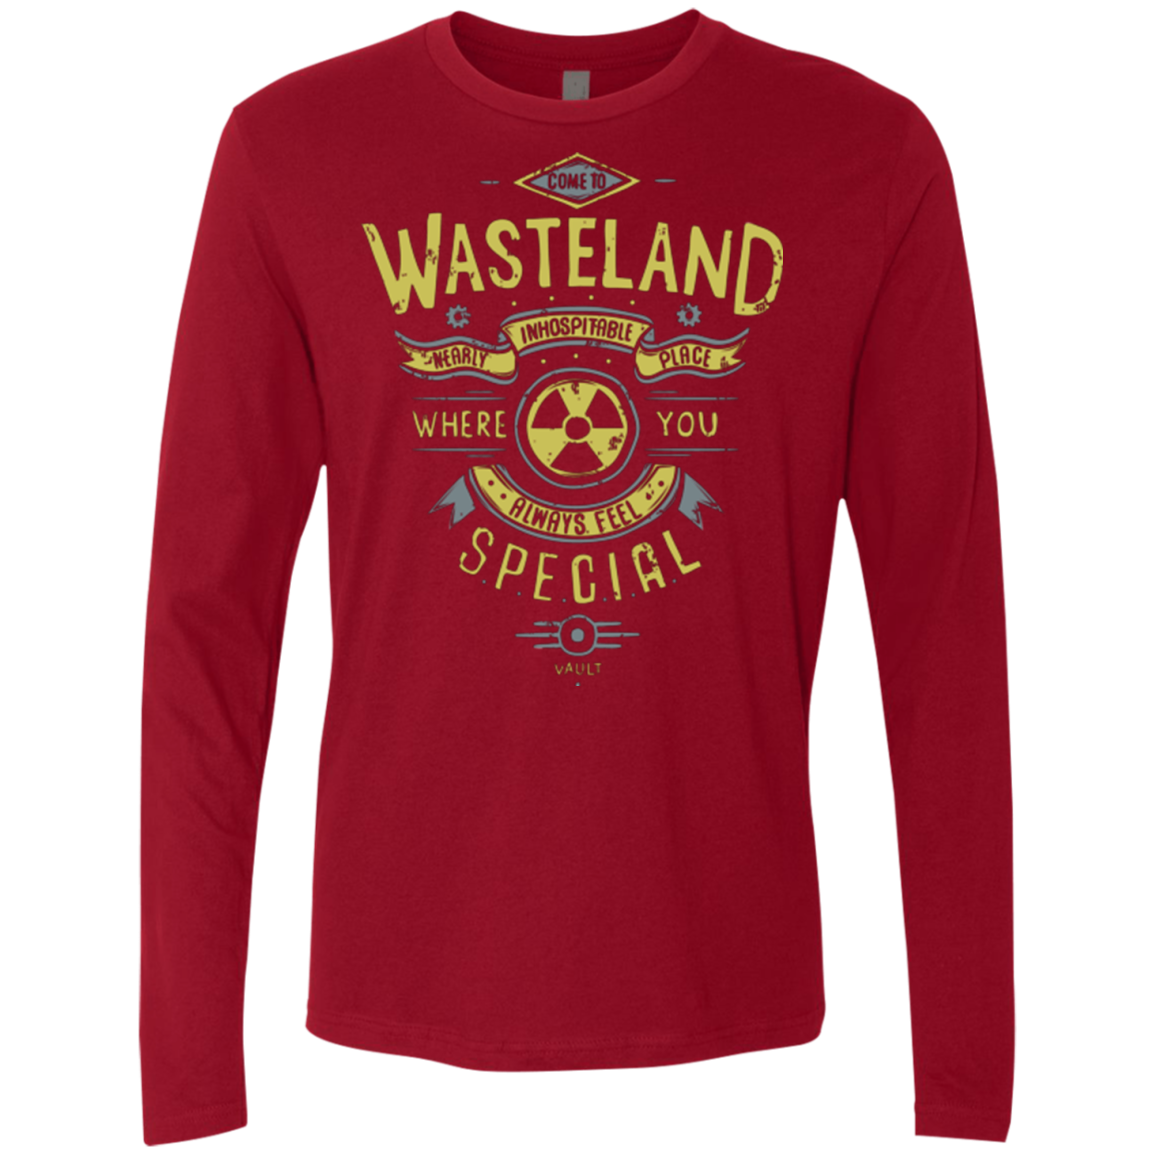 Come to wasteland Men's Premium Long Sleeve